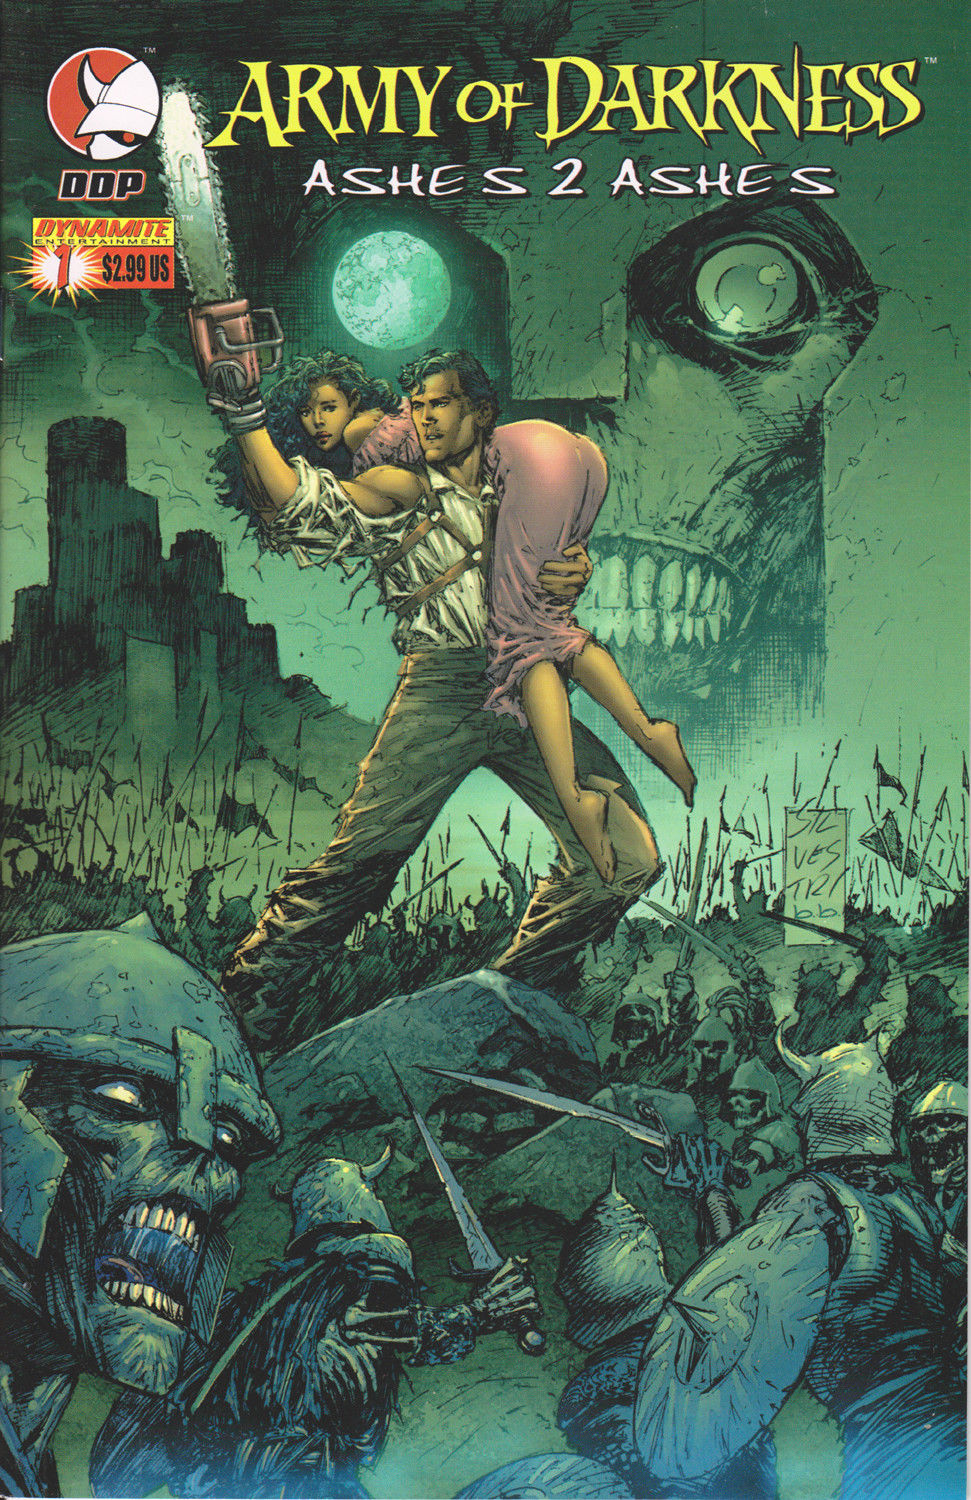 ARMY OF DARKNESS: ASHES 2 ASHES #1 (MARC SILVESTRI VARIANT) COMIC BOOK ~ Devil's Due/Dynamite